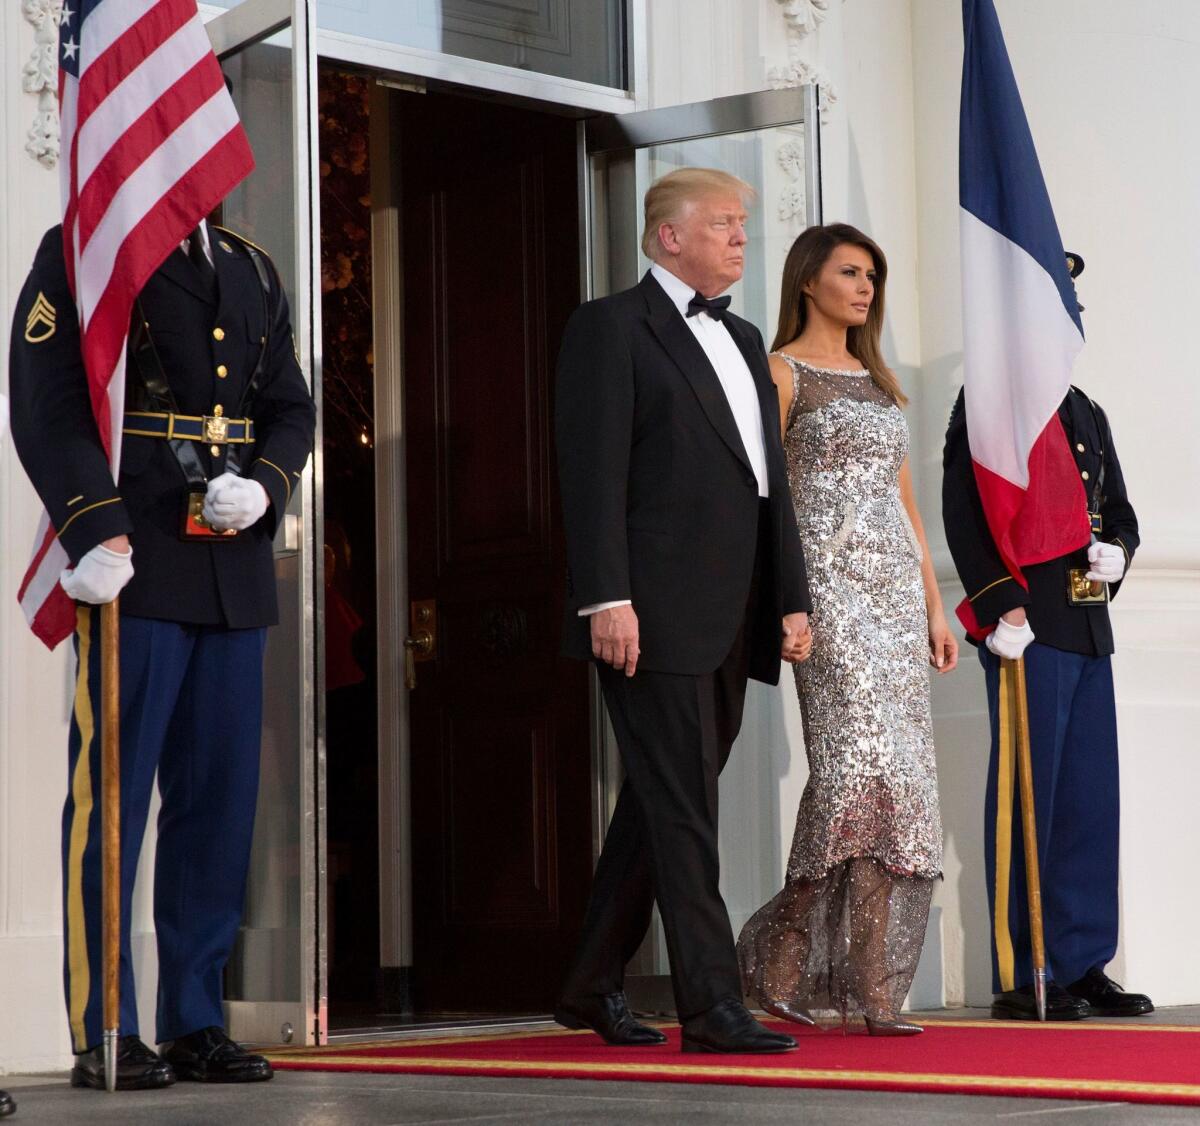 President Trump and First Lady Melania Trump.